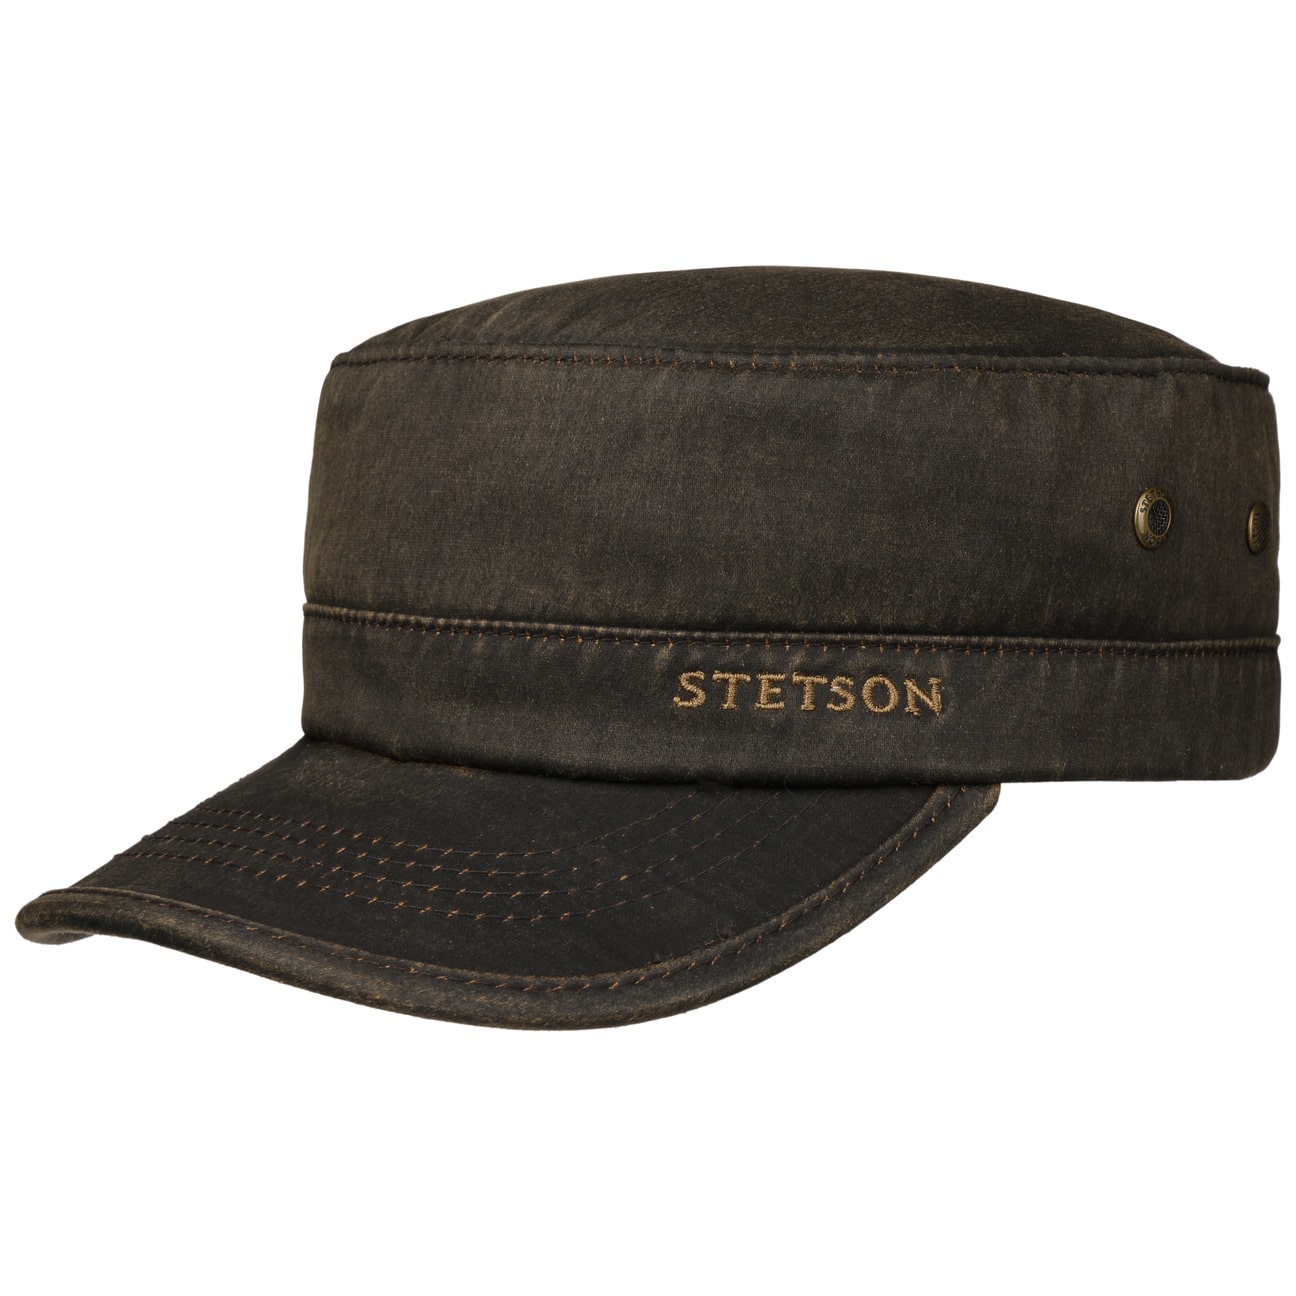 Stetson 7491120-6 Army Cap Datto Brown Winter